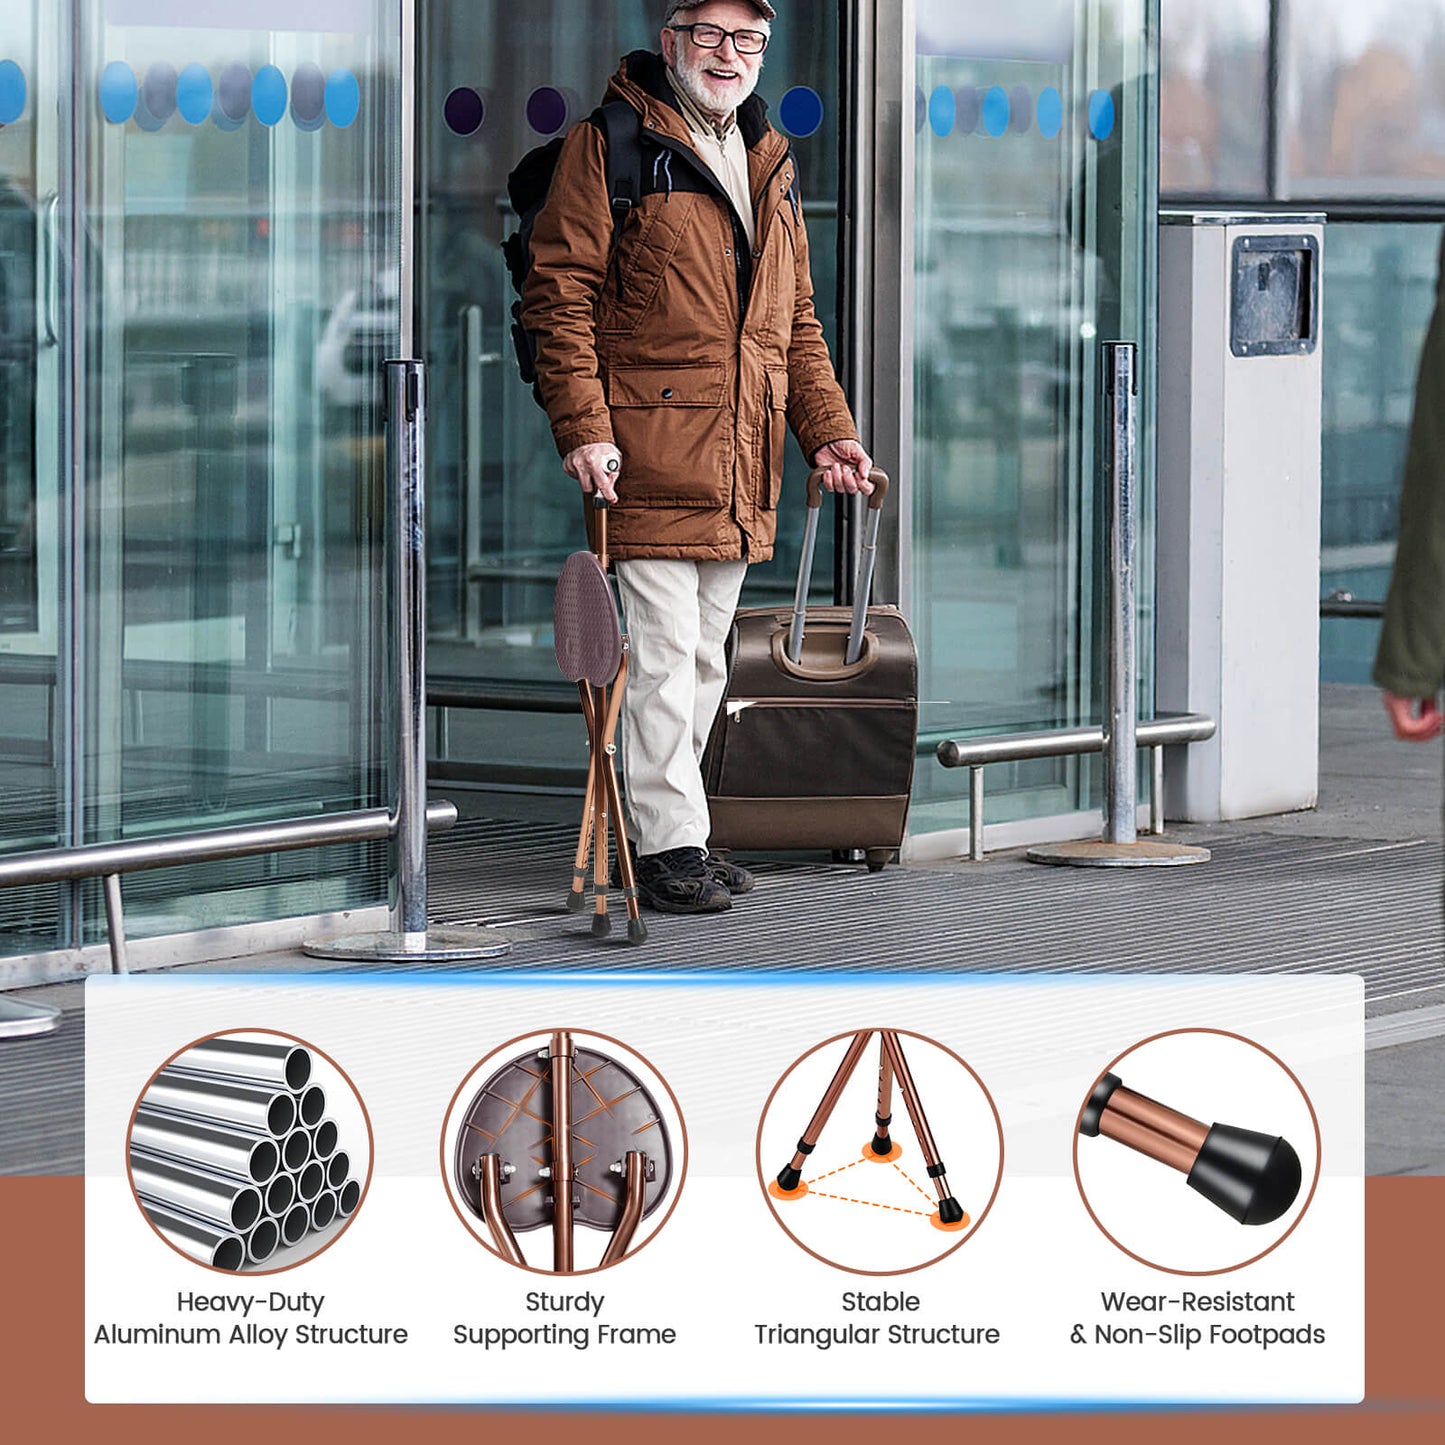 Lightweight Adjustable Folding Cane Seat with Light-Brown